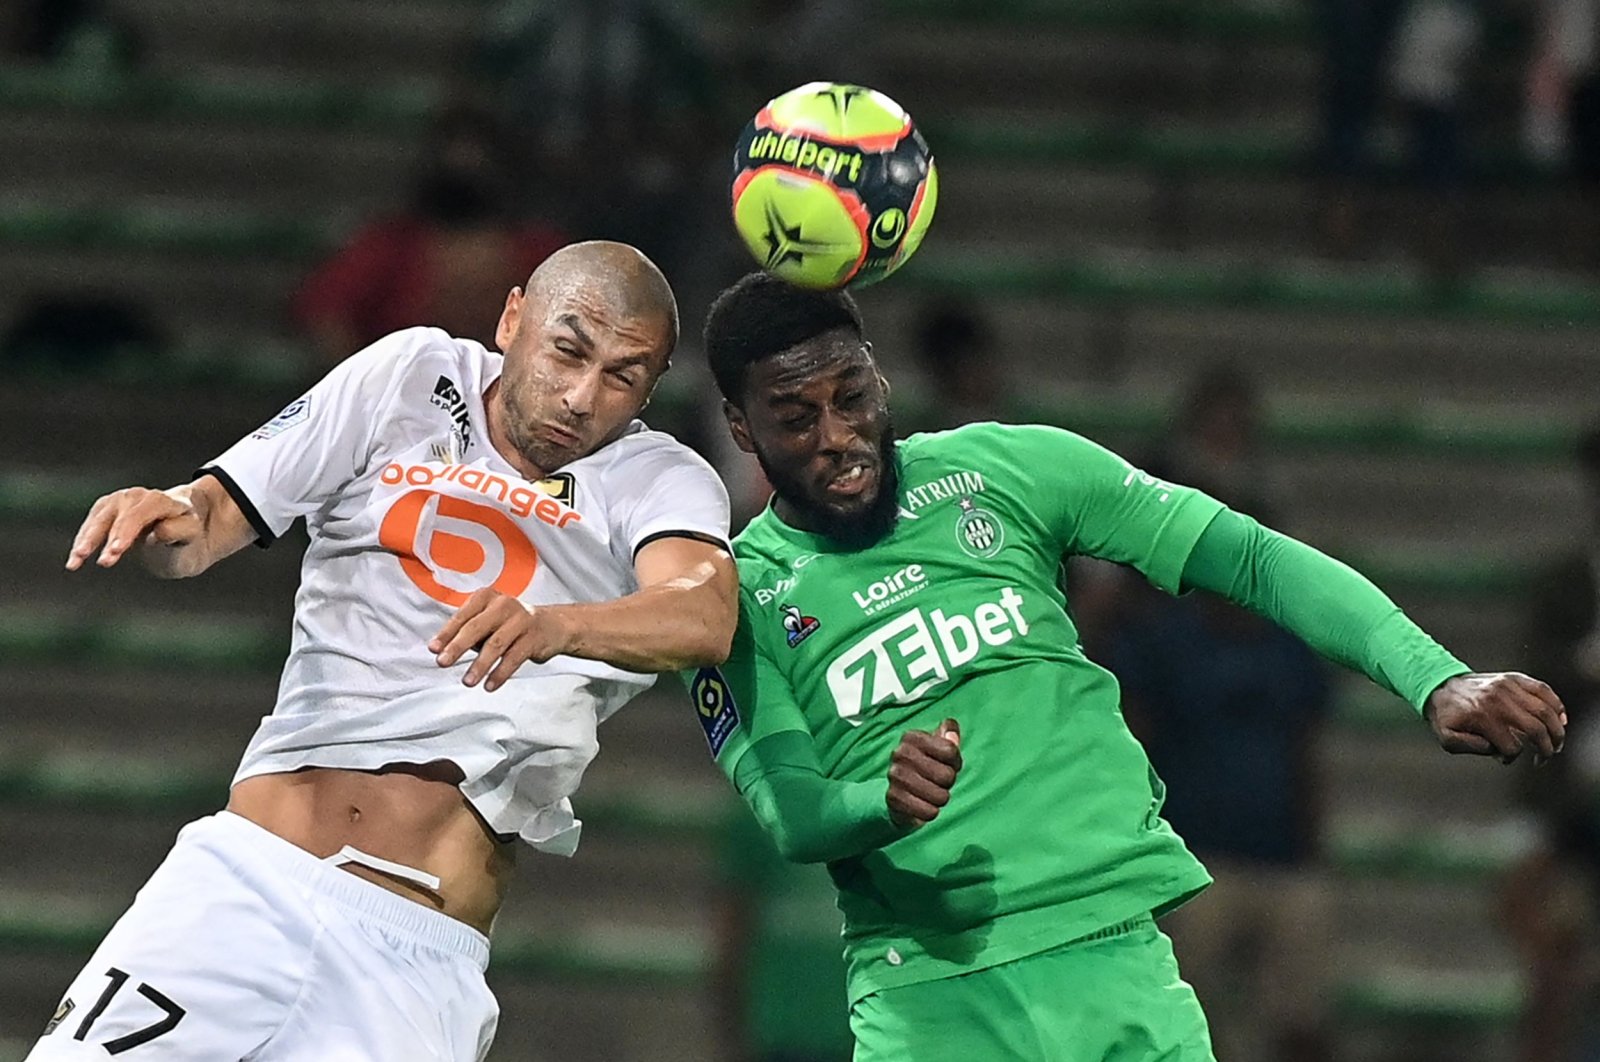 Lille's Turkish forward Burak Yılmaz (L) fights for the ball in the air with Saint-Etienne's French forward Jean-Philippe Krasso during a French L1 match, Saint-Etienne, France, Aug. 21, 2021.(AFP Photo)